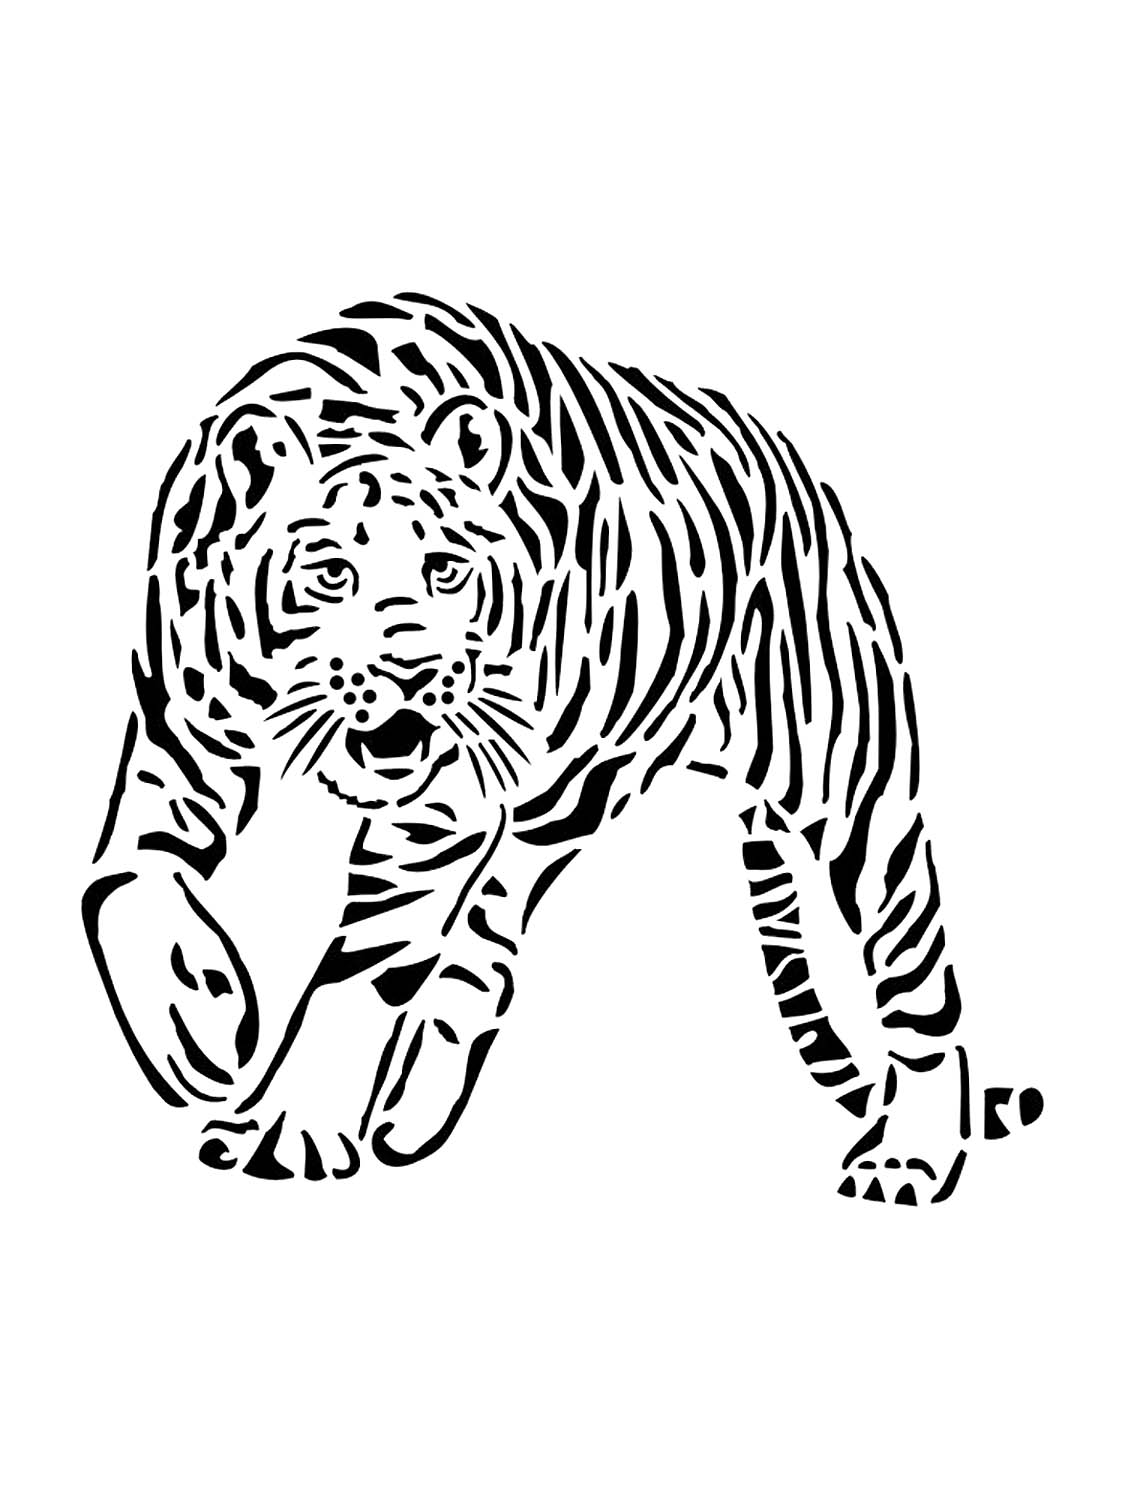 Tiger Stencils Free Stencils And Template Cutout Printable 3726